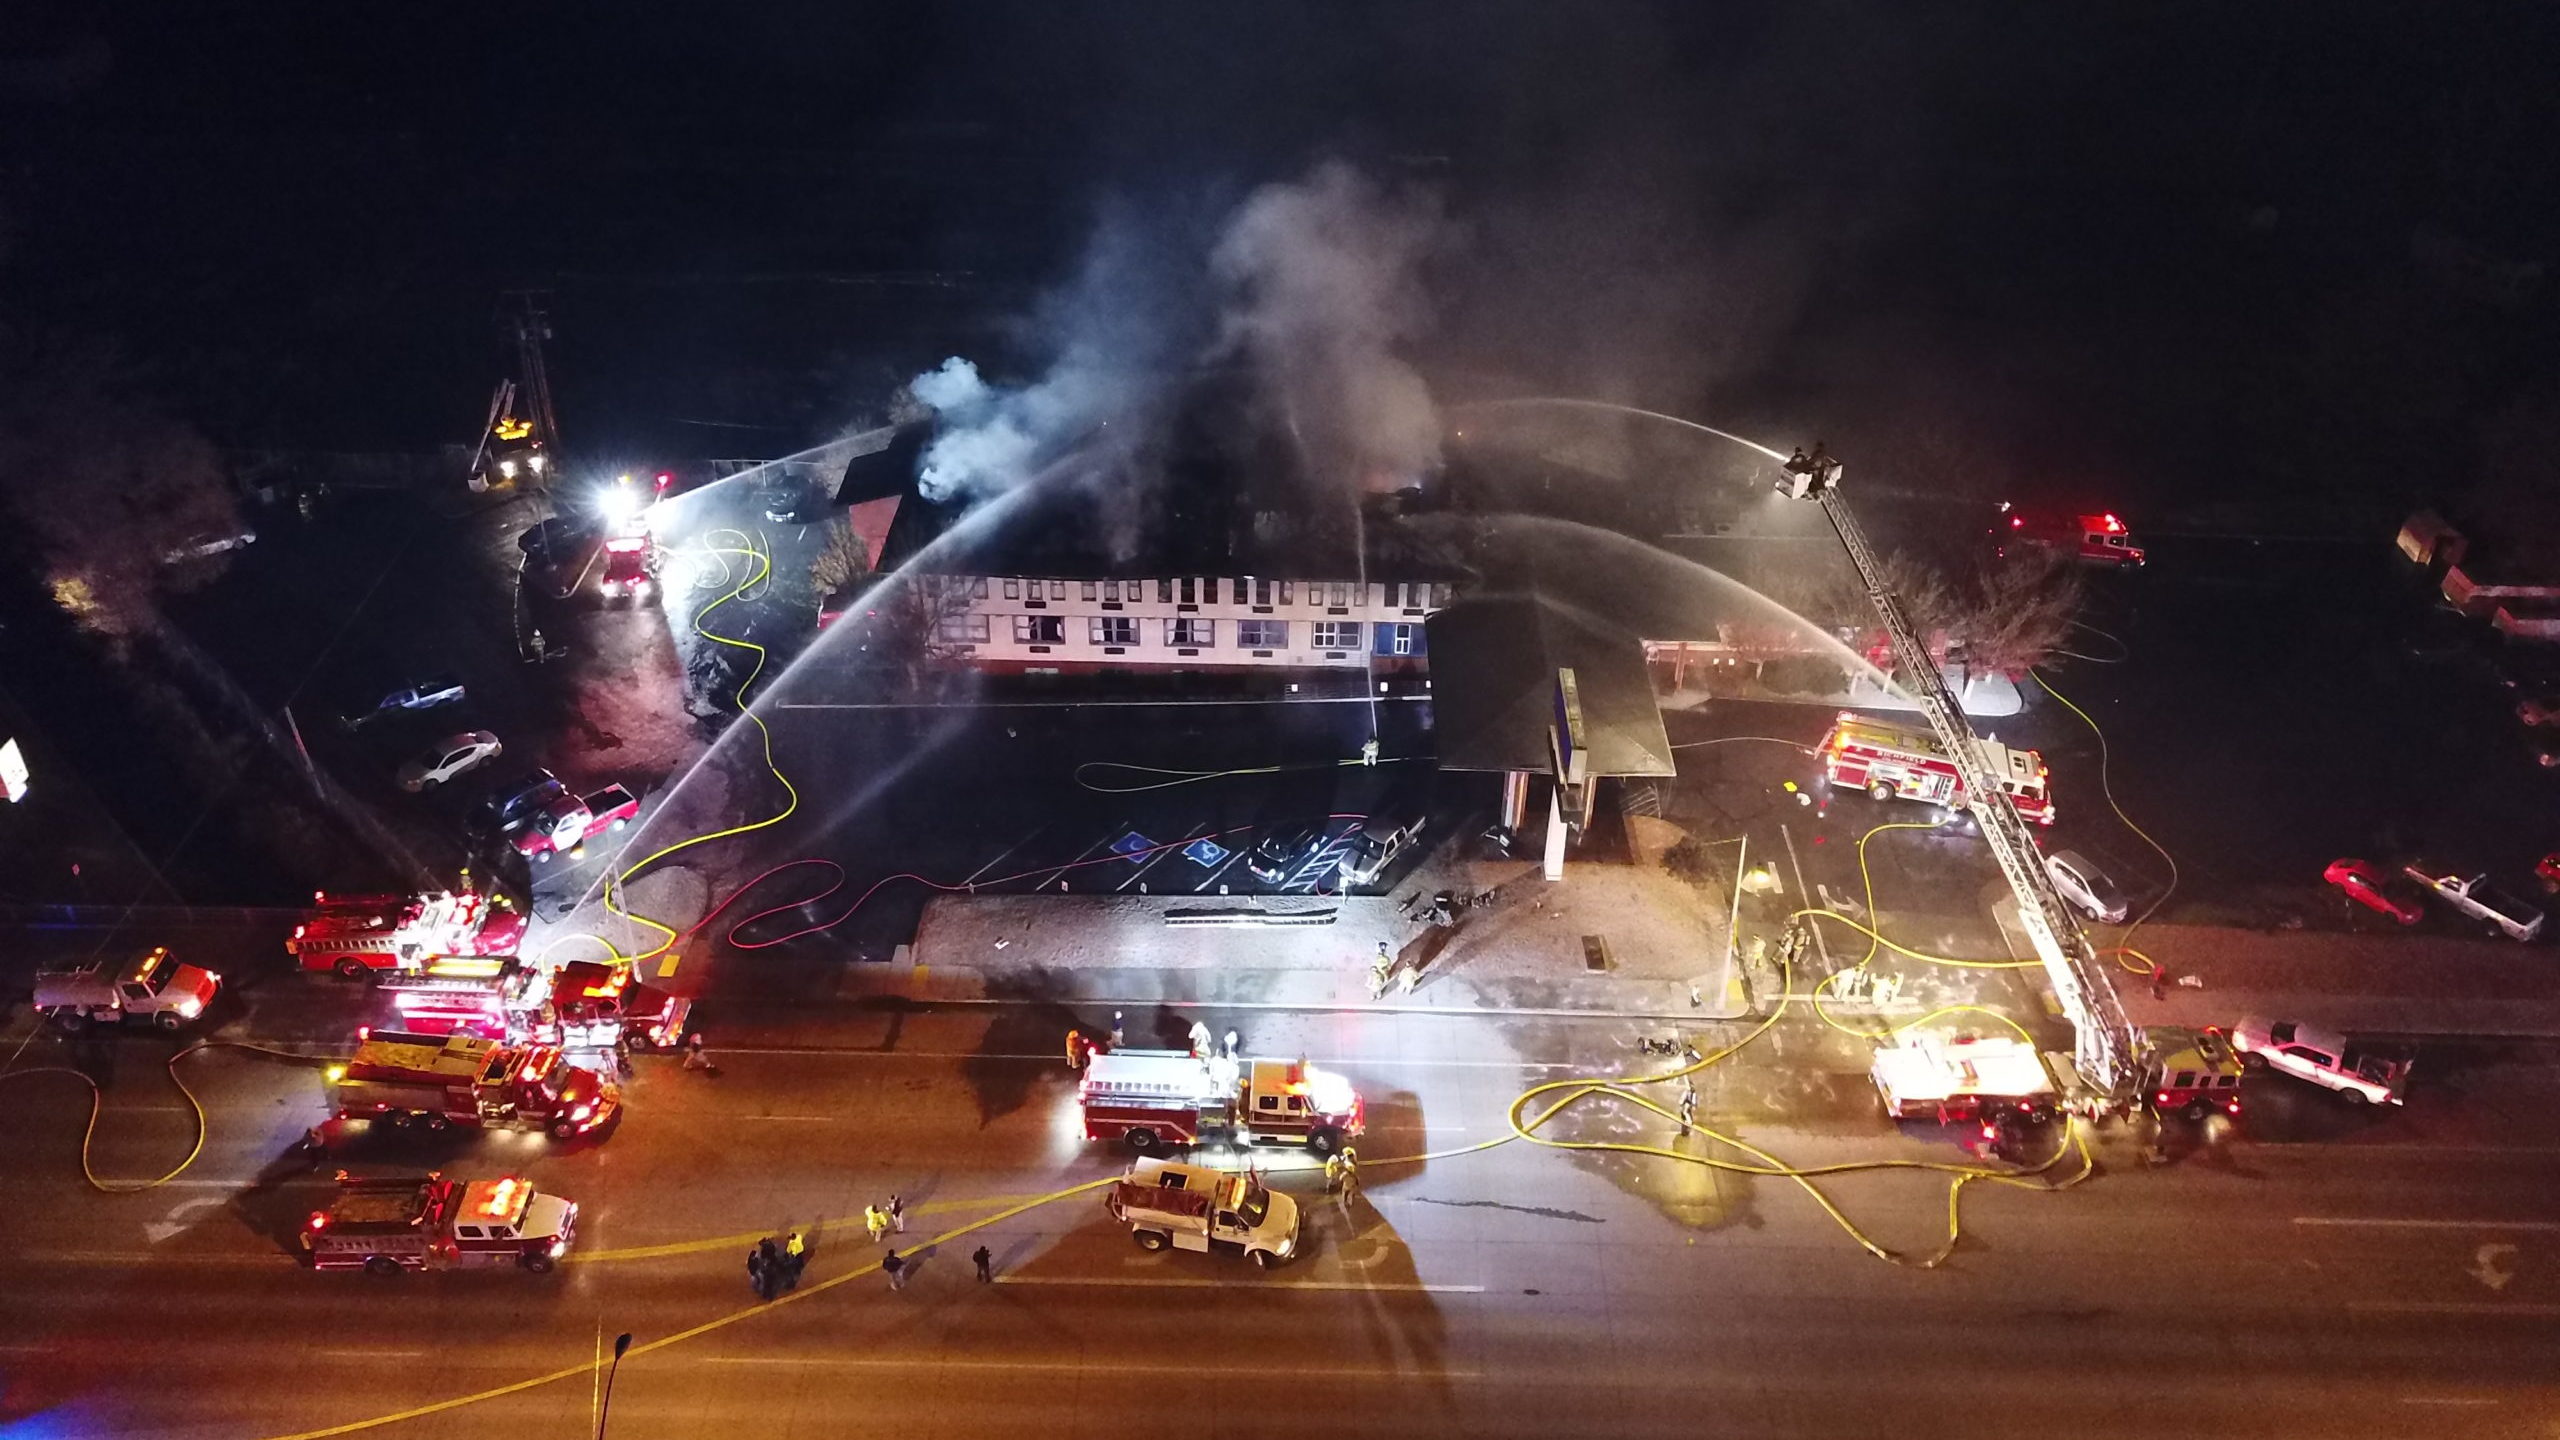 A fire in Richfield Monday night destroyed a motel, officials say. Photo credit: Keaton Anderson...